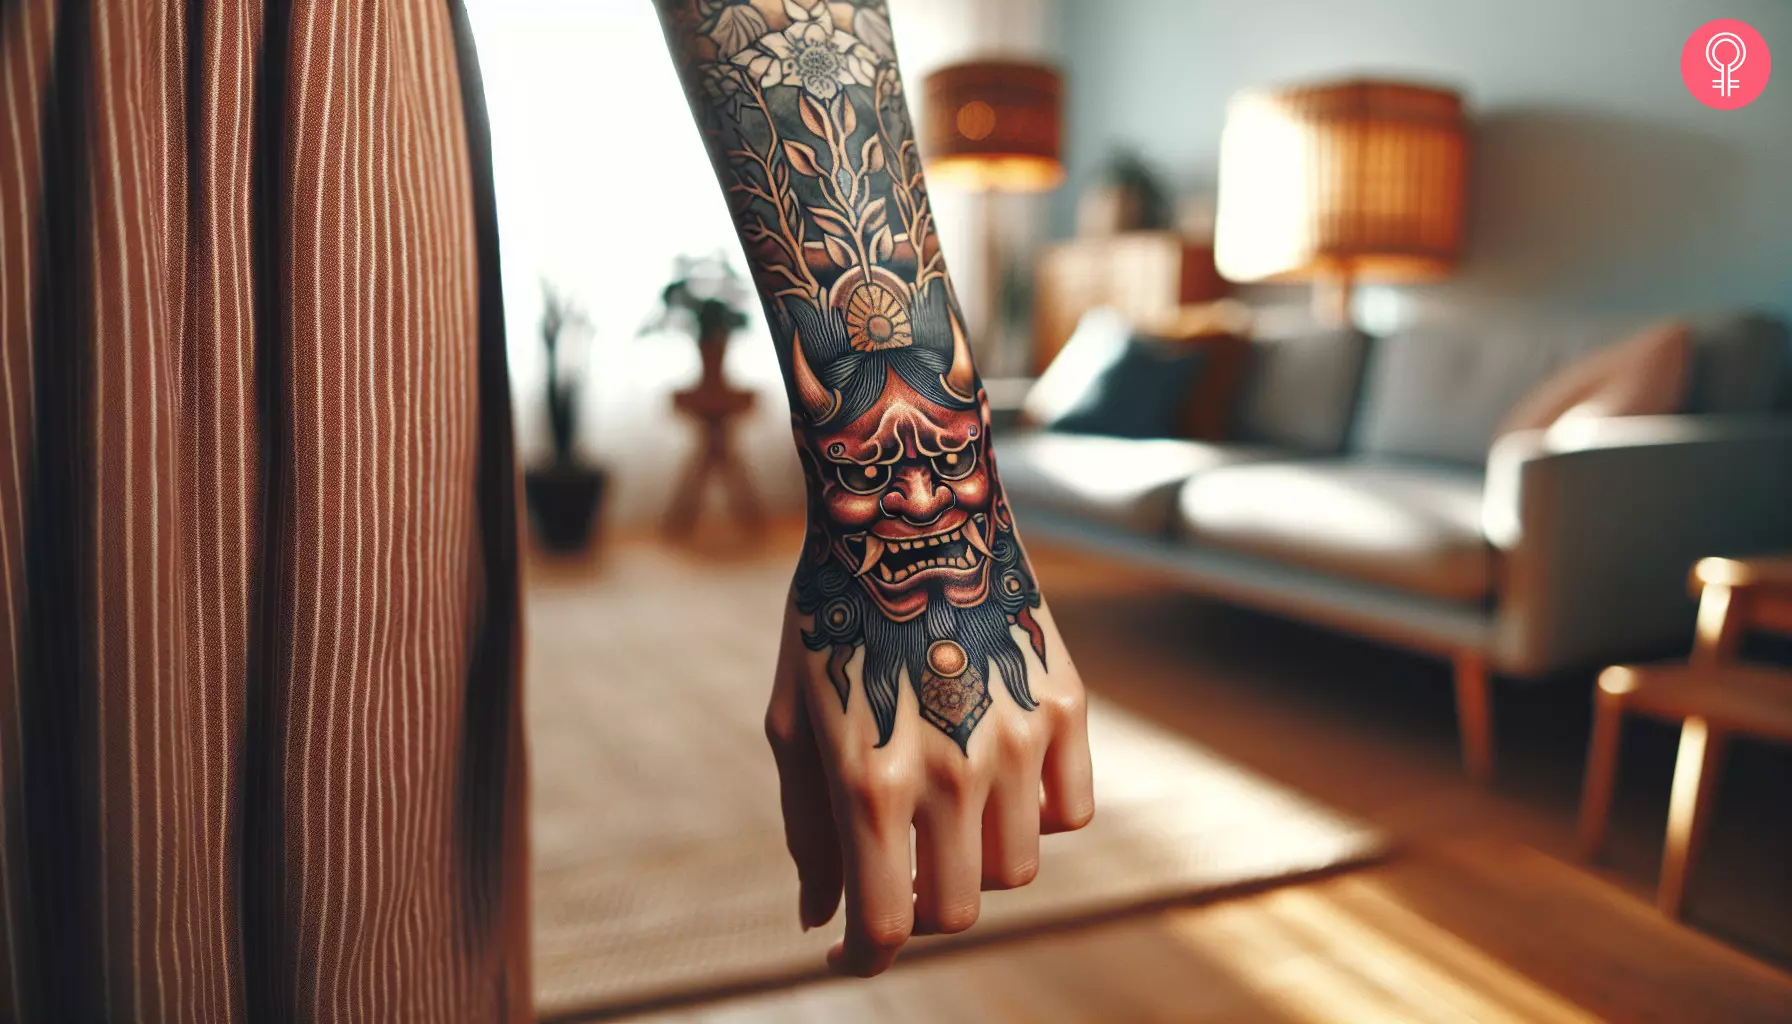 An oriental tattoo on the hand